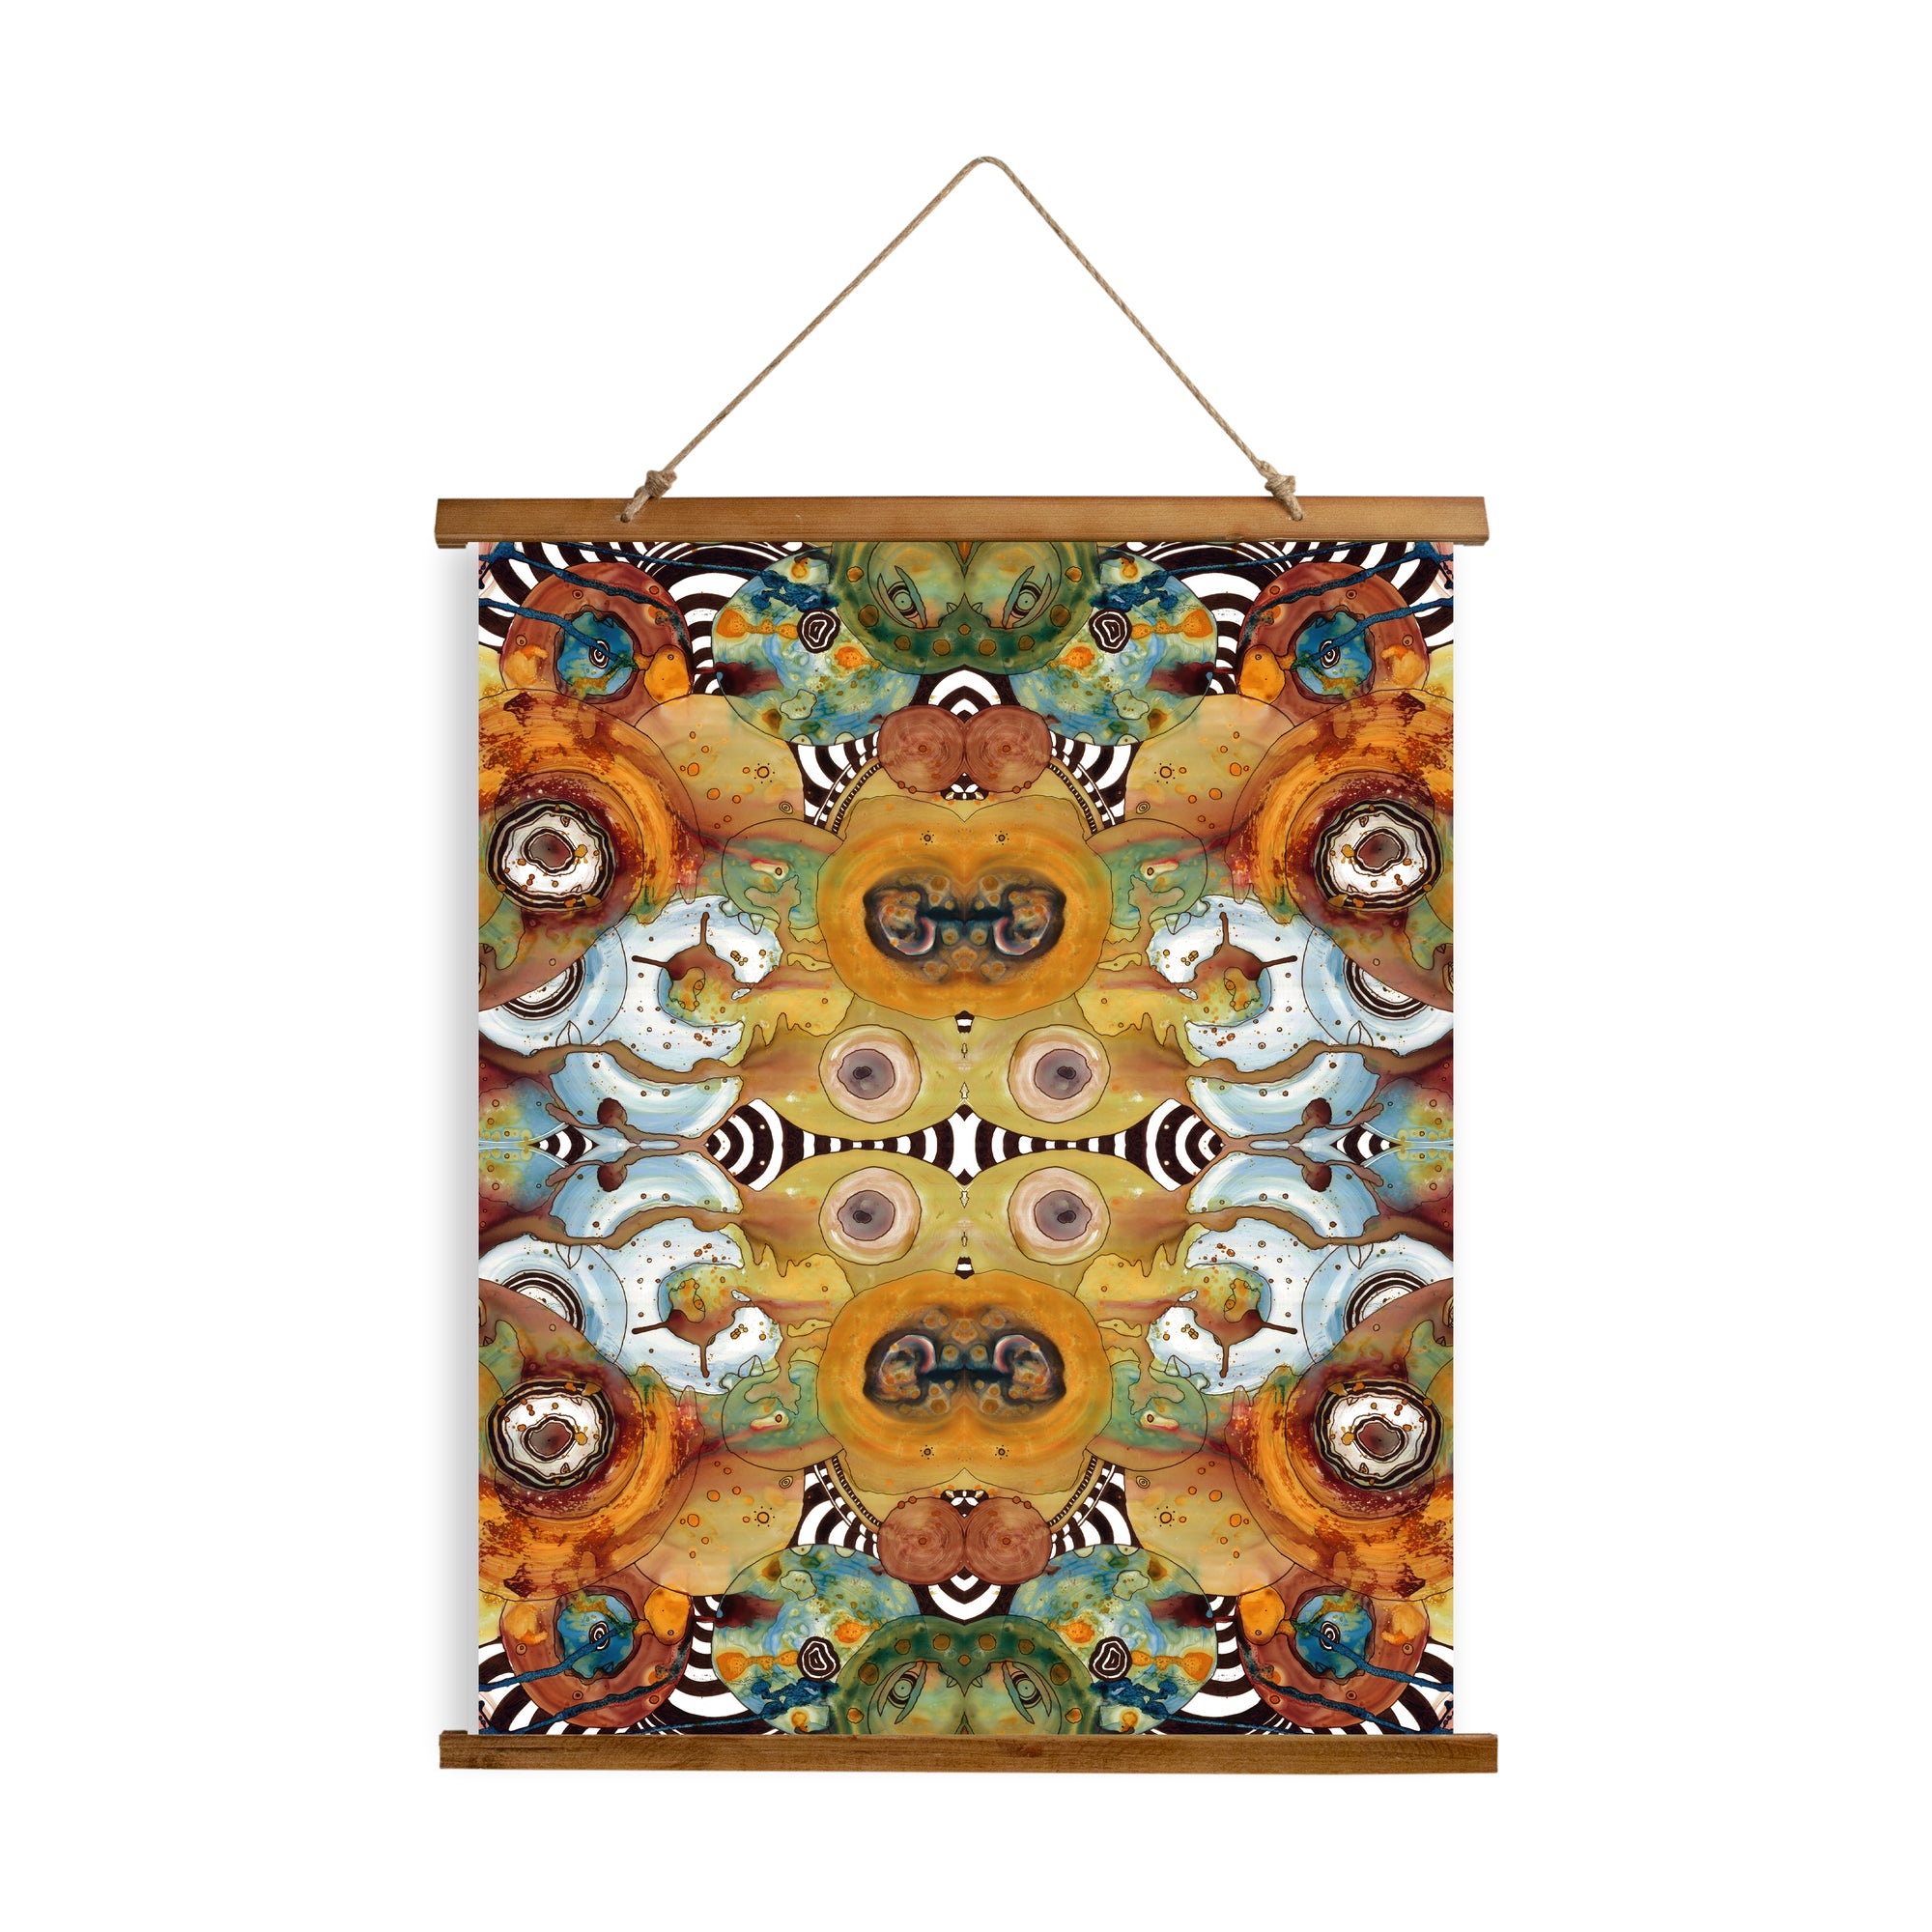 Whimsical Wood Slat Tapestry "Energy Abstract Pattern"